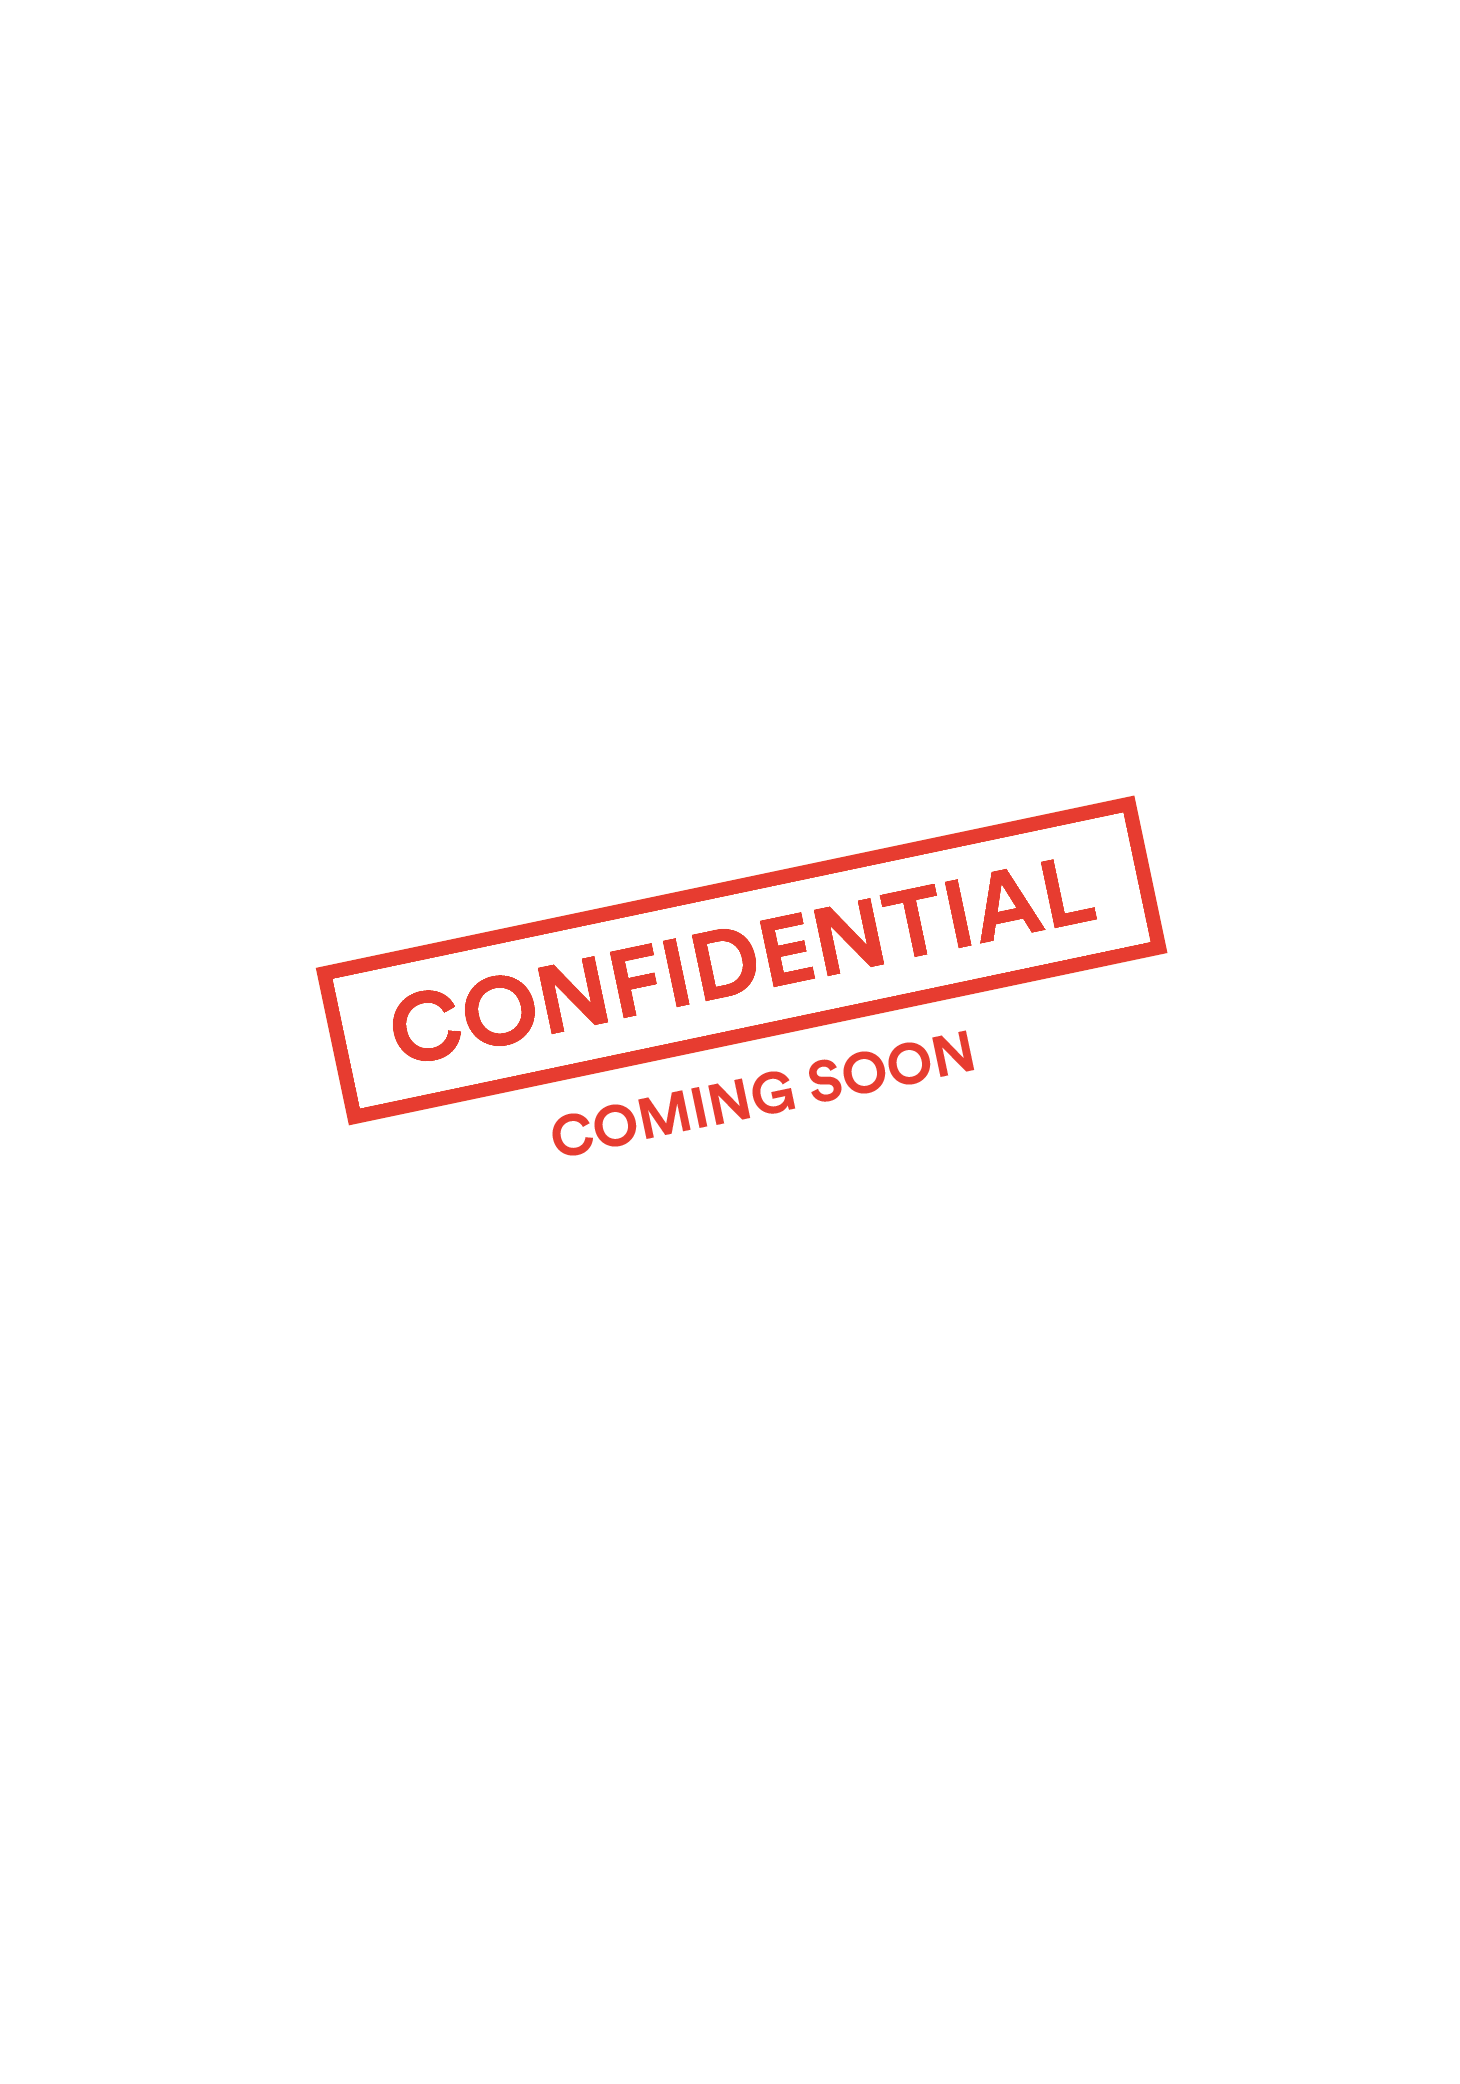 overlay for escape room that says 'Confidential: Coming Soon'